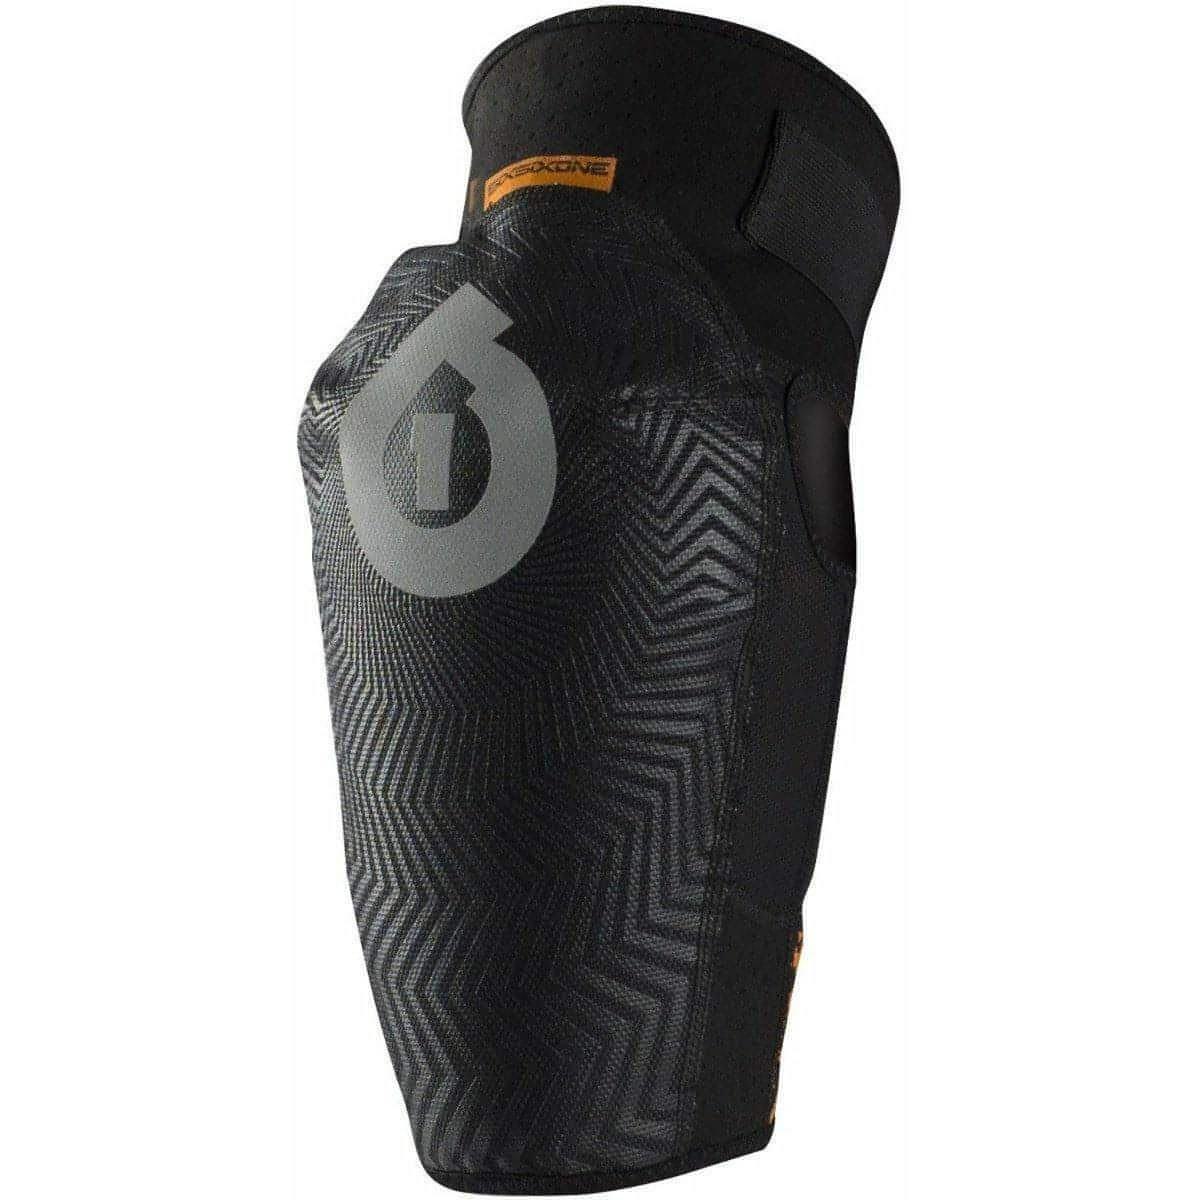 SixSixOne Comp AM Junior Cycling Elbow Guards - Black 844502566134 - Start Fitness